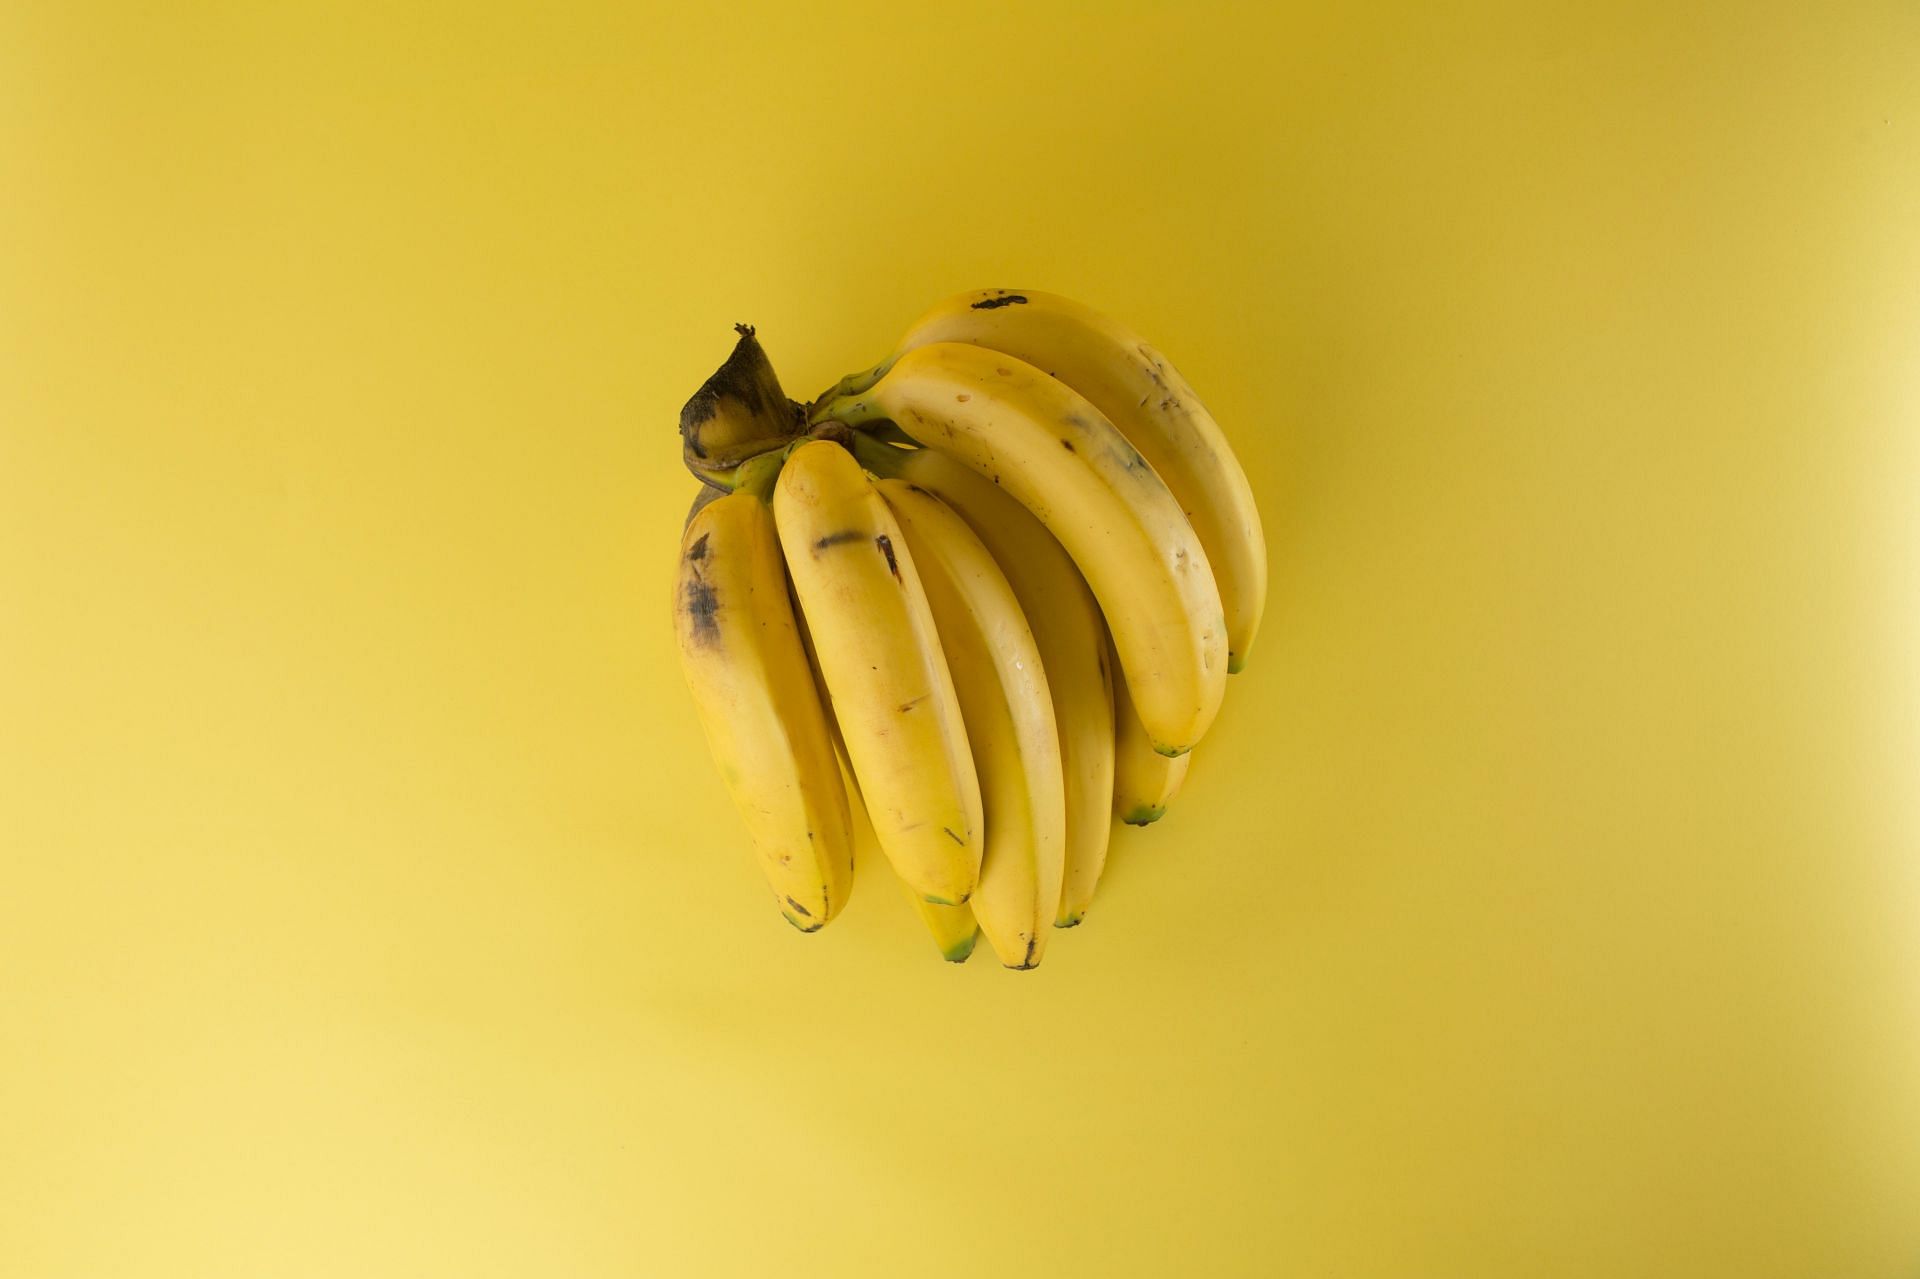 Bananas are an all time favourite snack for many. (Image via Pexels/ Juan Salamanca)